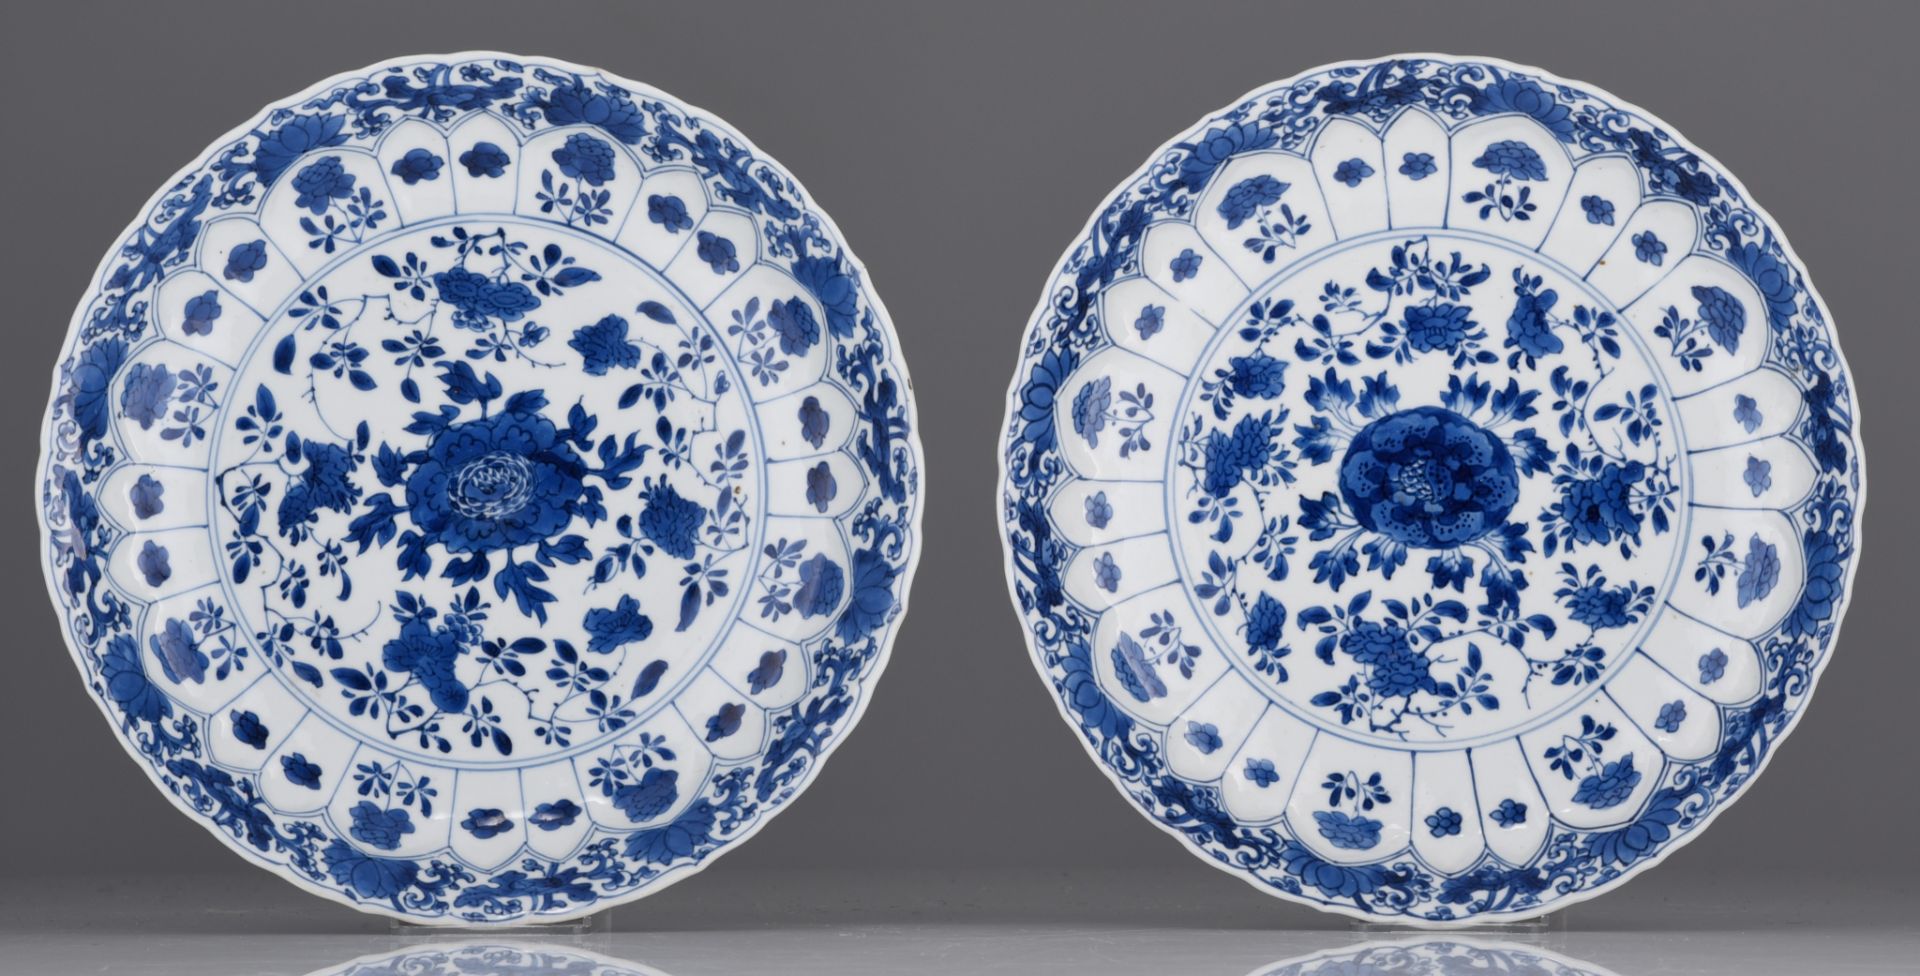 Two Chinese blue and white lobed plates, with a Chenghua mark, Kangxi period, ¯ 26 cm - Image 2 of 5